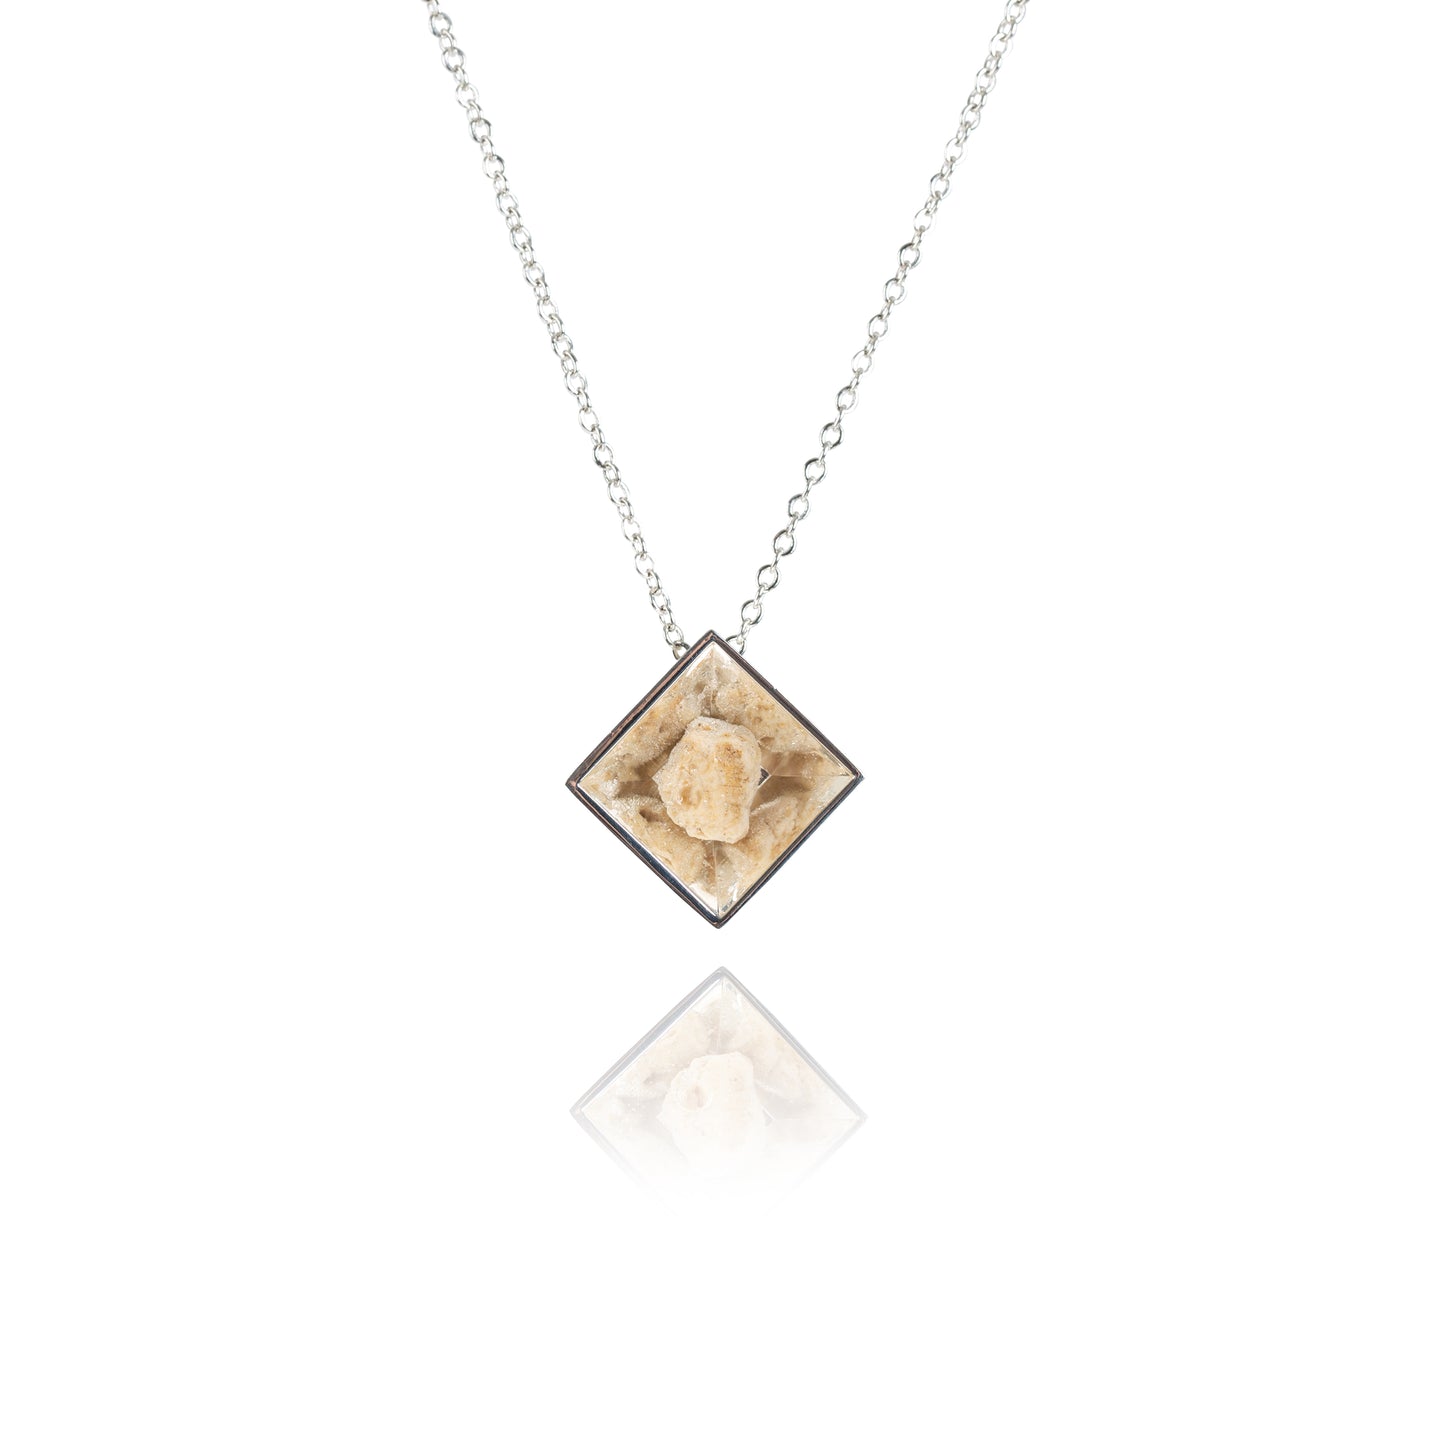 A small natural tan stone sitting in the middle of a diamond shaped metal pendant in a silver color. The pendant is hanging on silver chain.